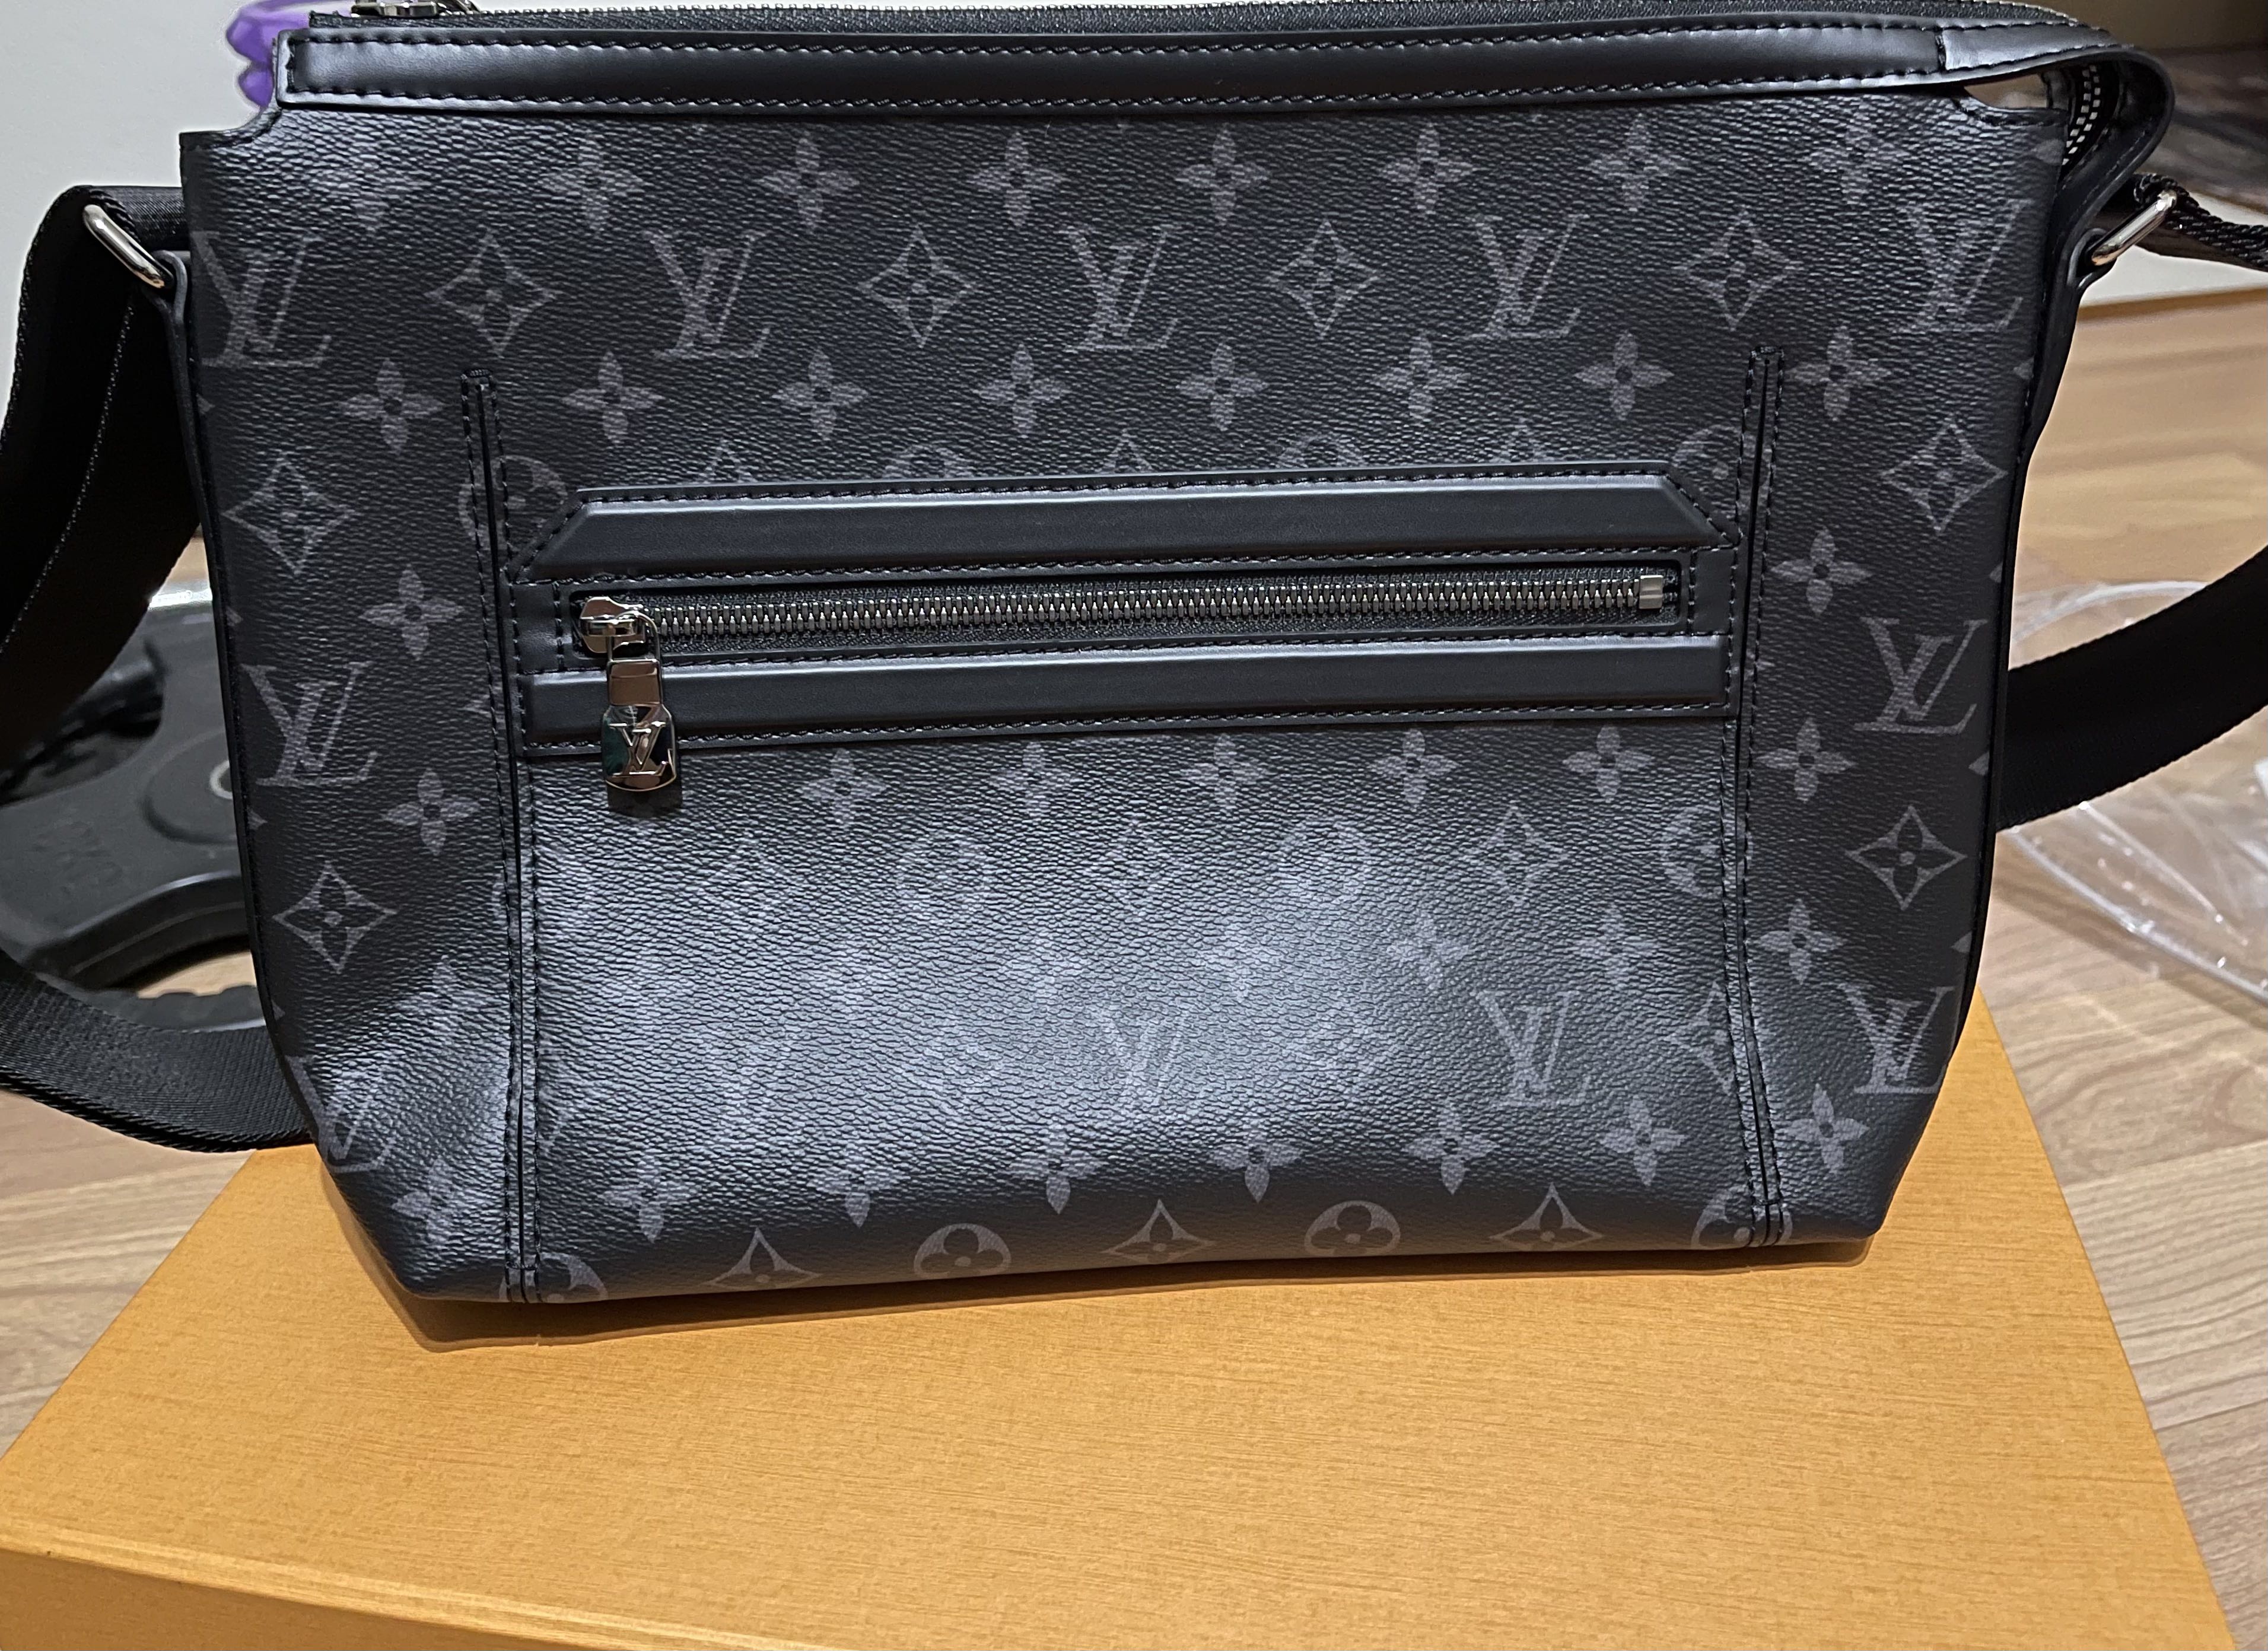 Jewel Cafe Malaysia - Louis Vuitton Odyssey Messenger Bag PM sold